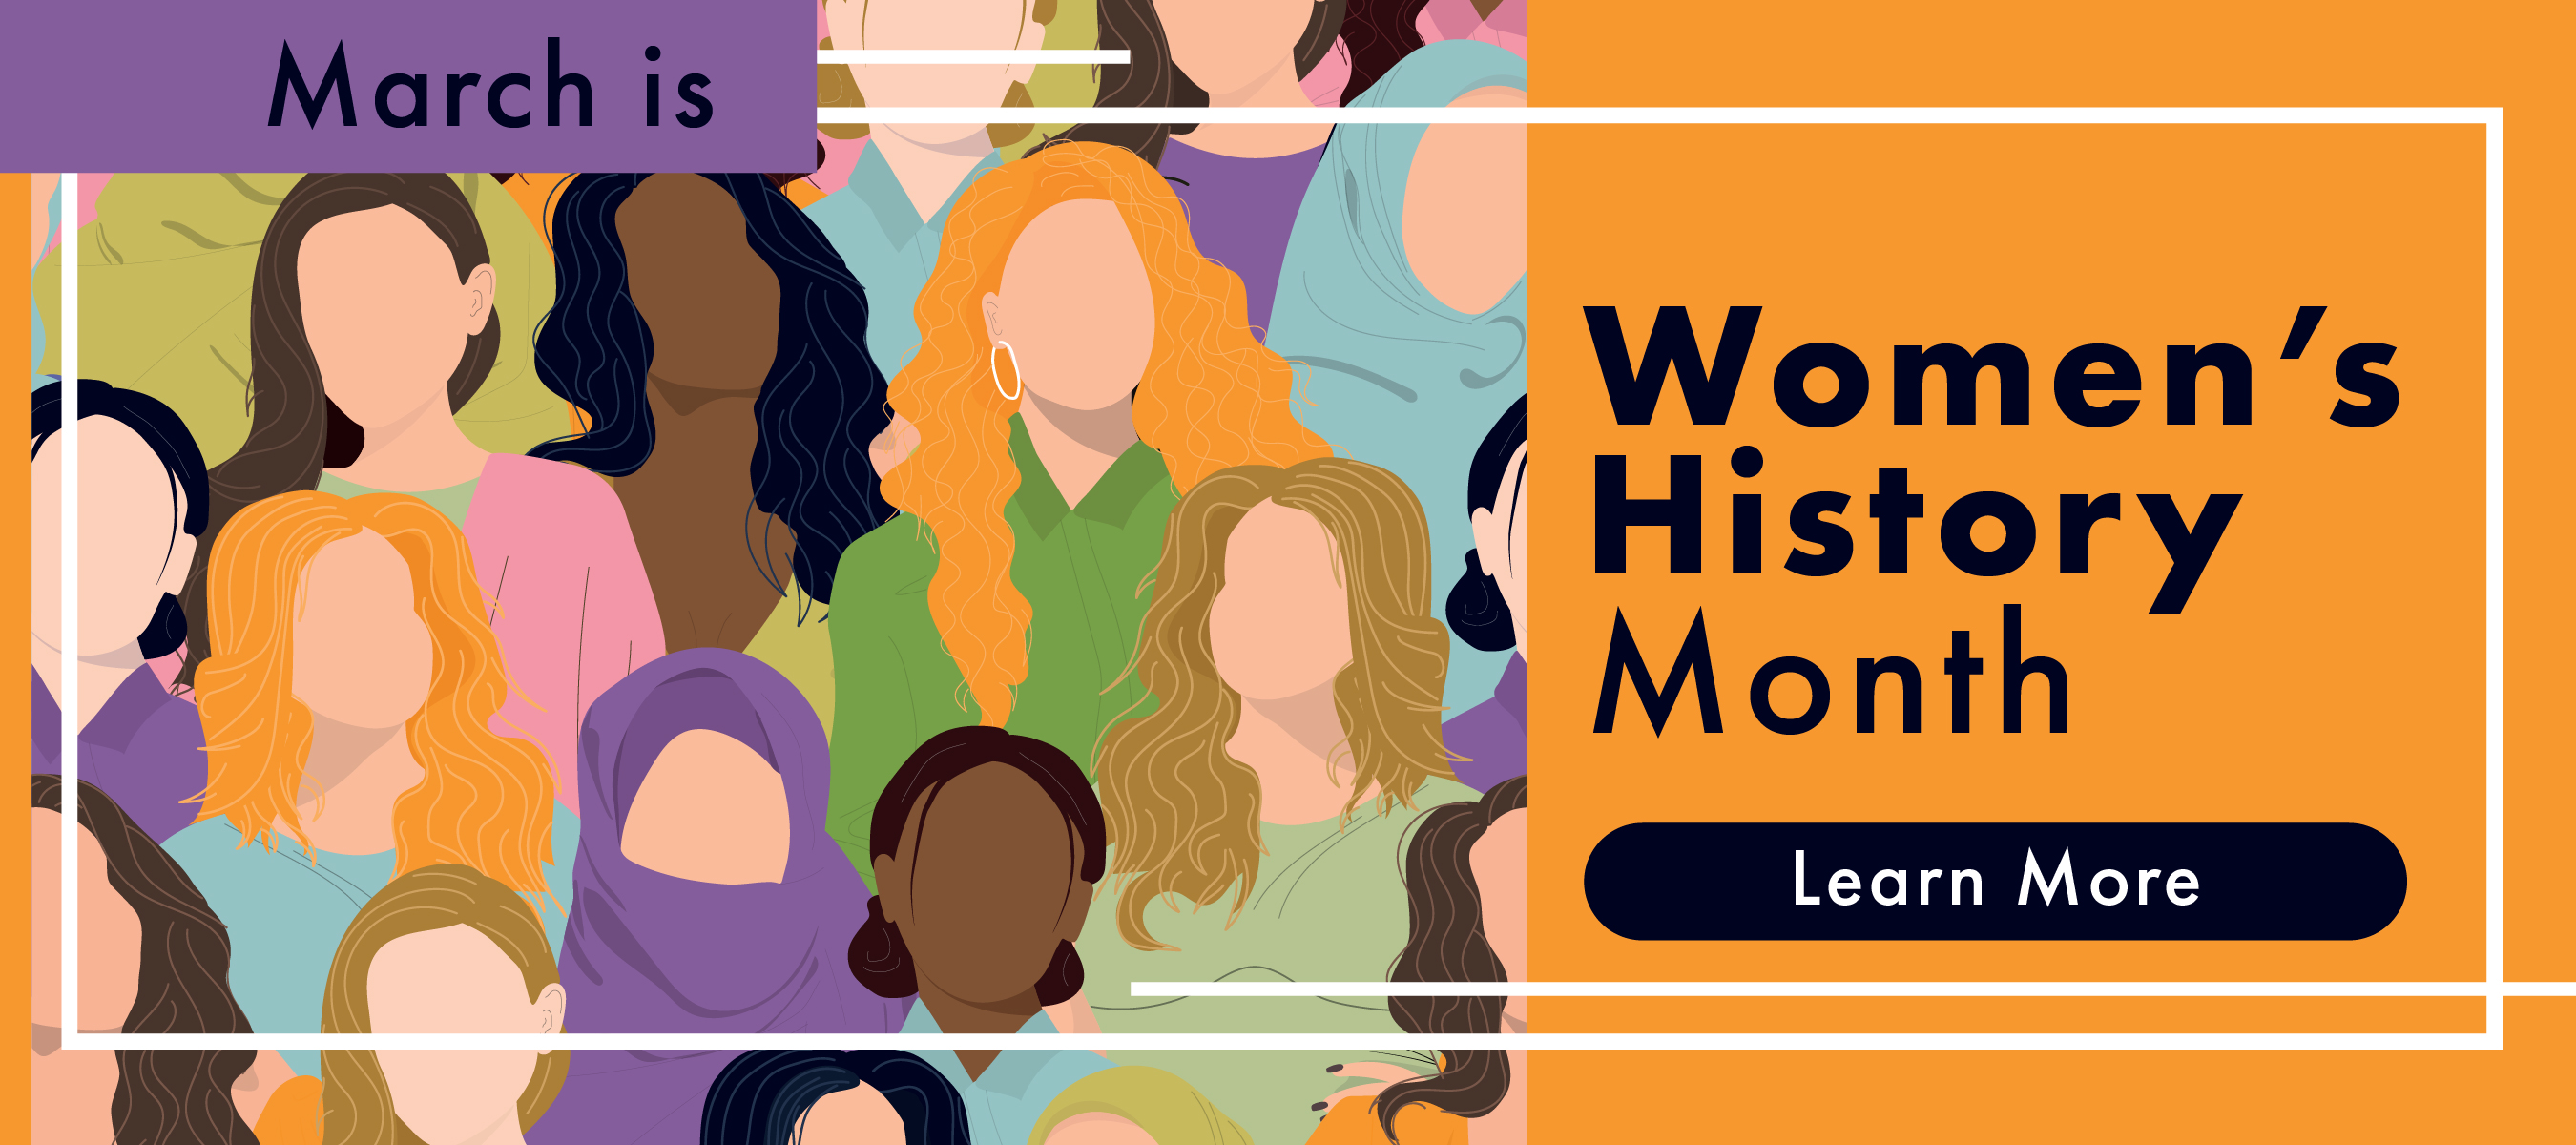 phpl, prospect heights public library, women's history month